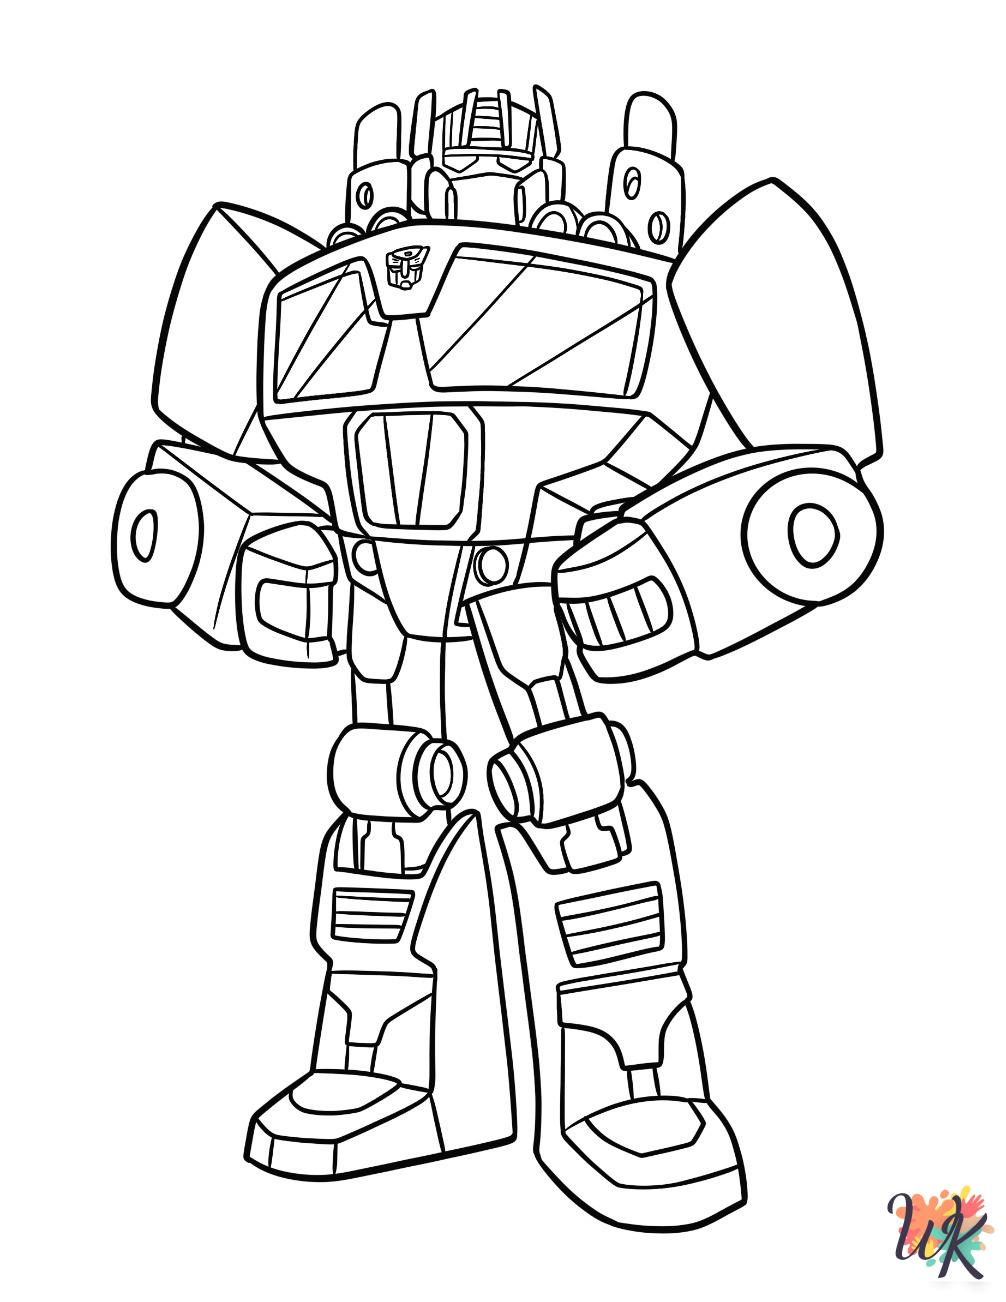 Optimus Prime free coloring pages